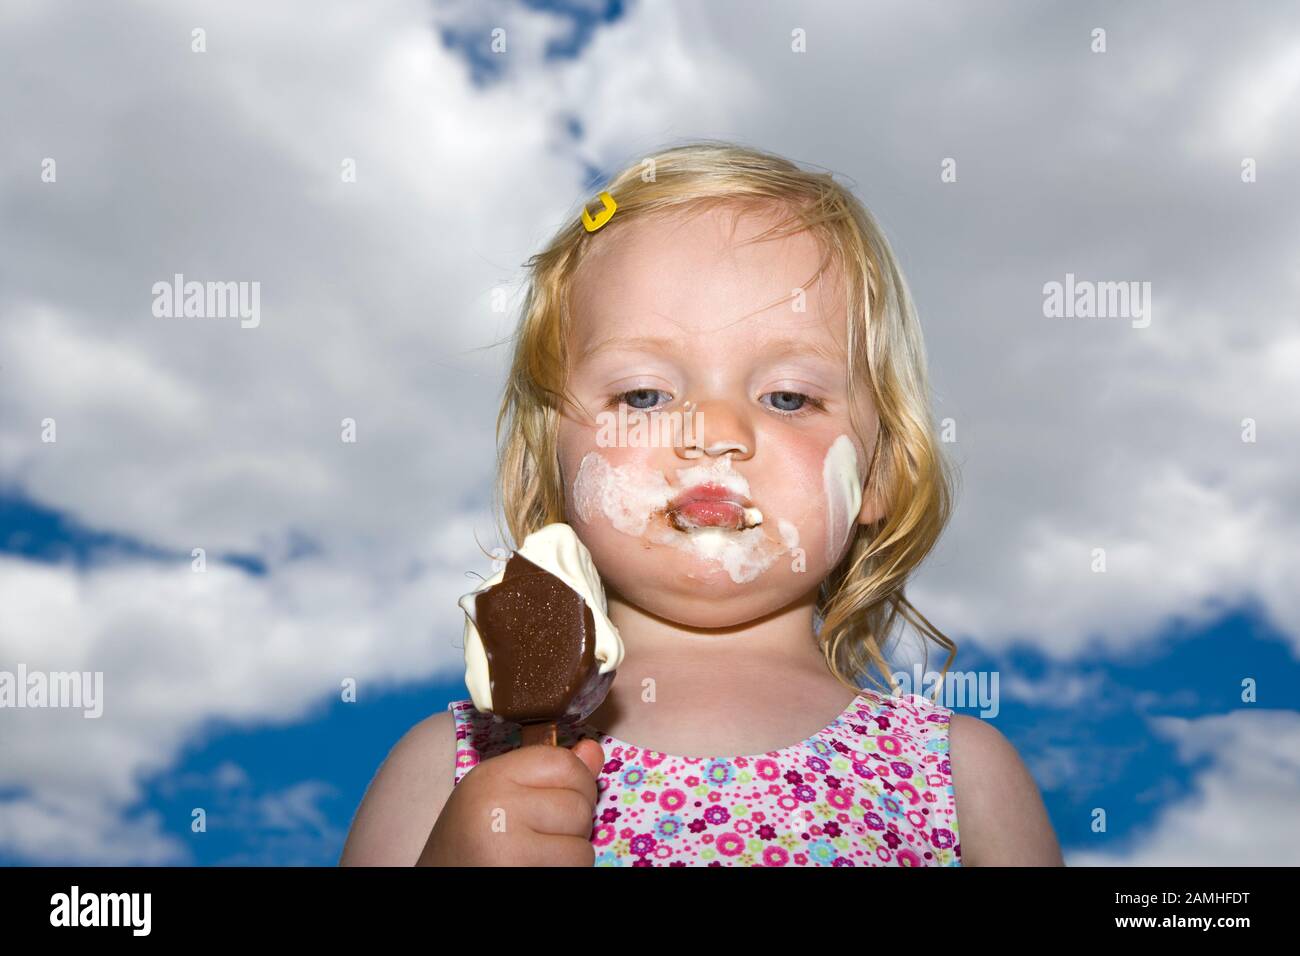 Young girl eating ice-cream with ice-cream on face Stock Photo